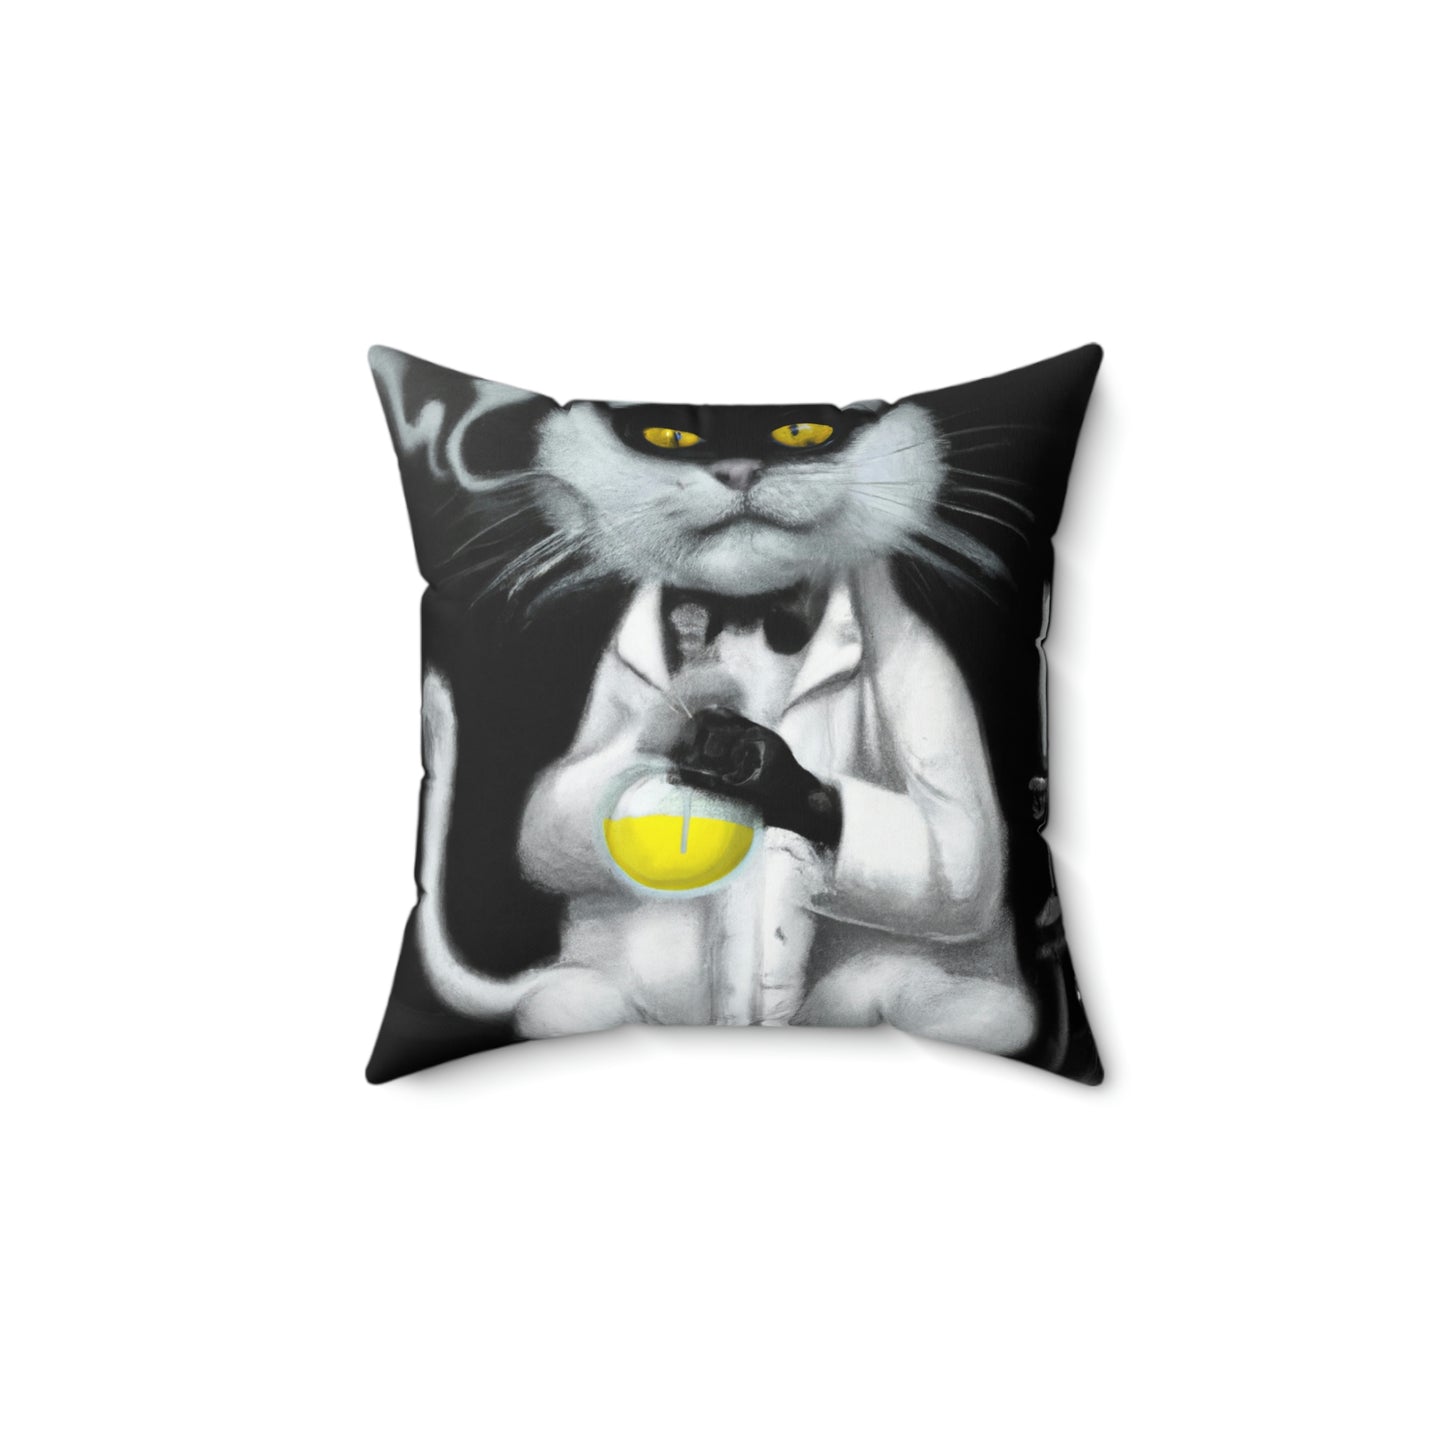 Mad Cat Decorative Polyester Square Pillow